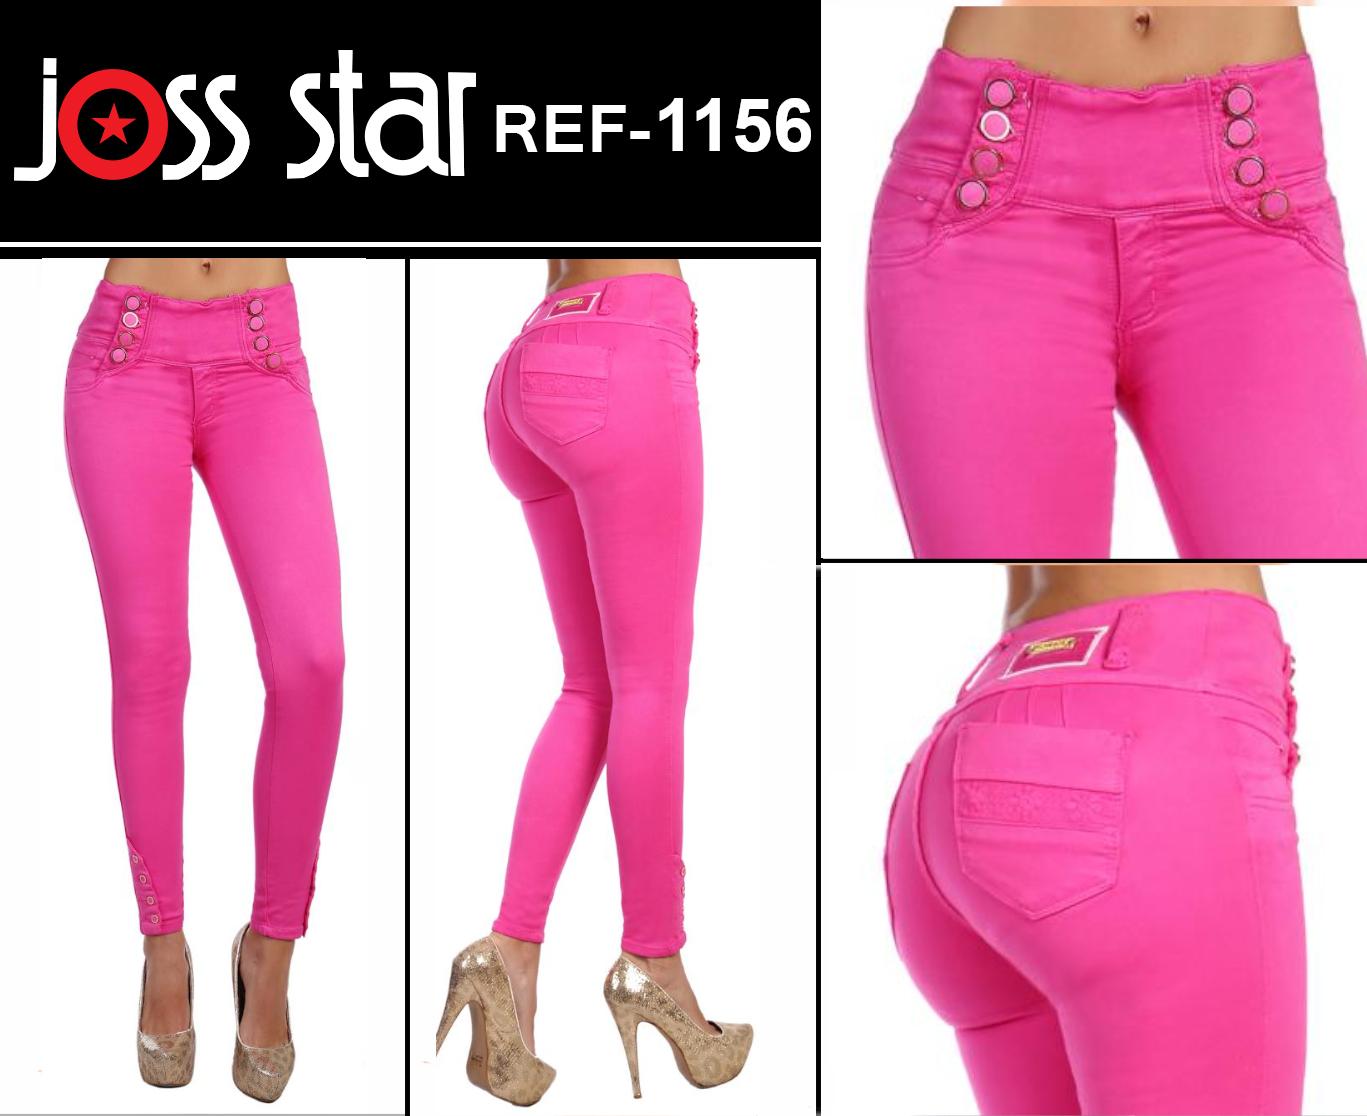 Jean Cowboy Colombian Tail Color Fuchsia With Wide Waistband and Side Buttons, Beautifully Decorated in The Belted Boots